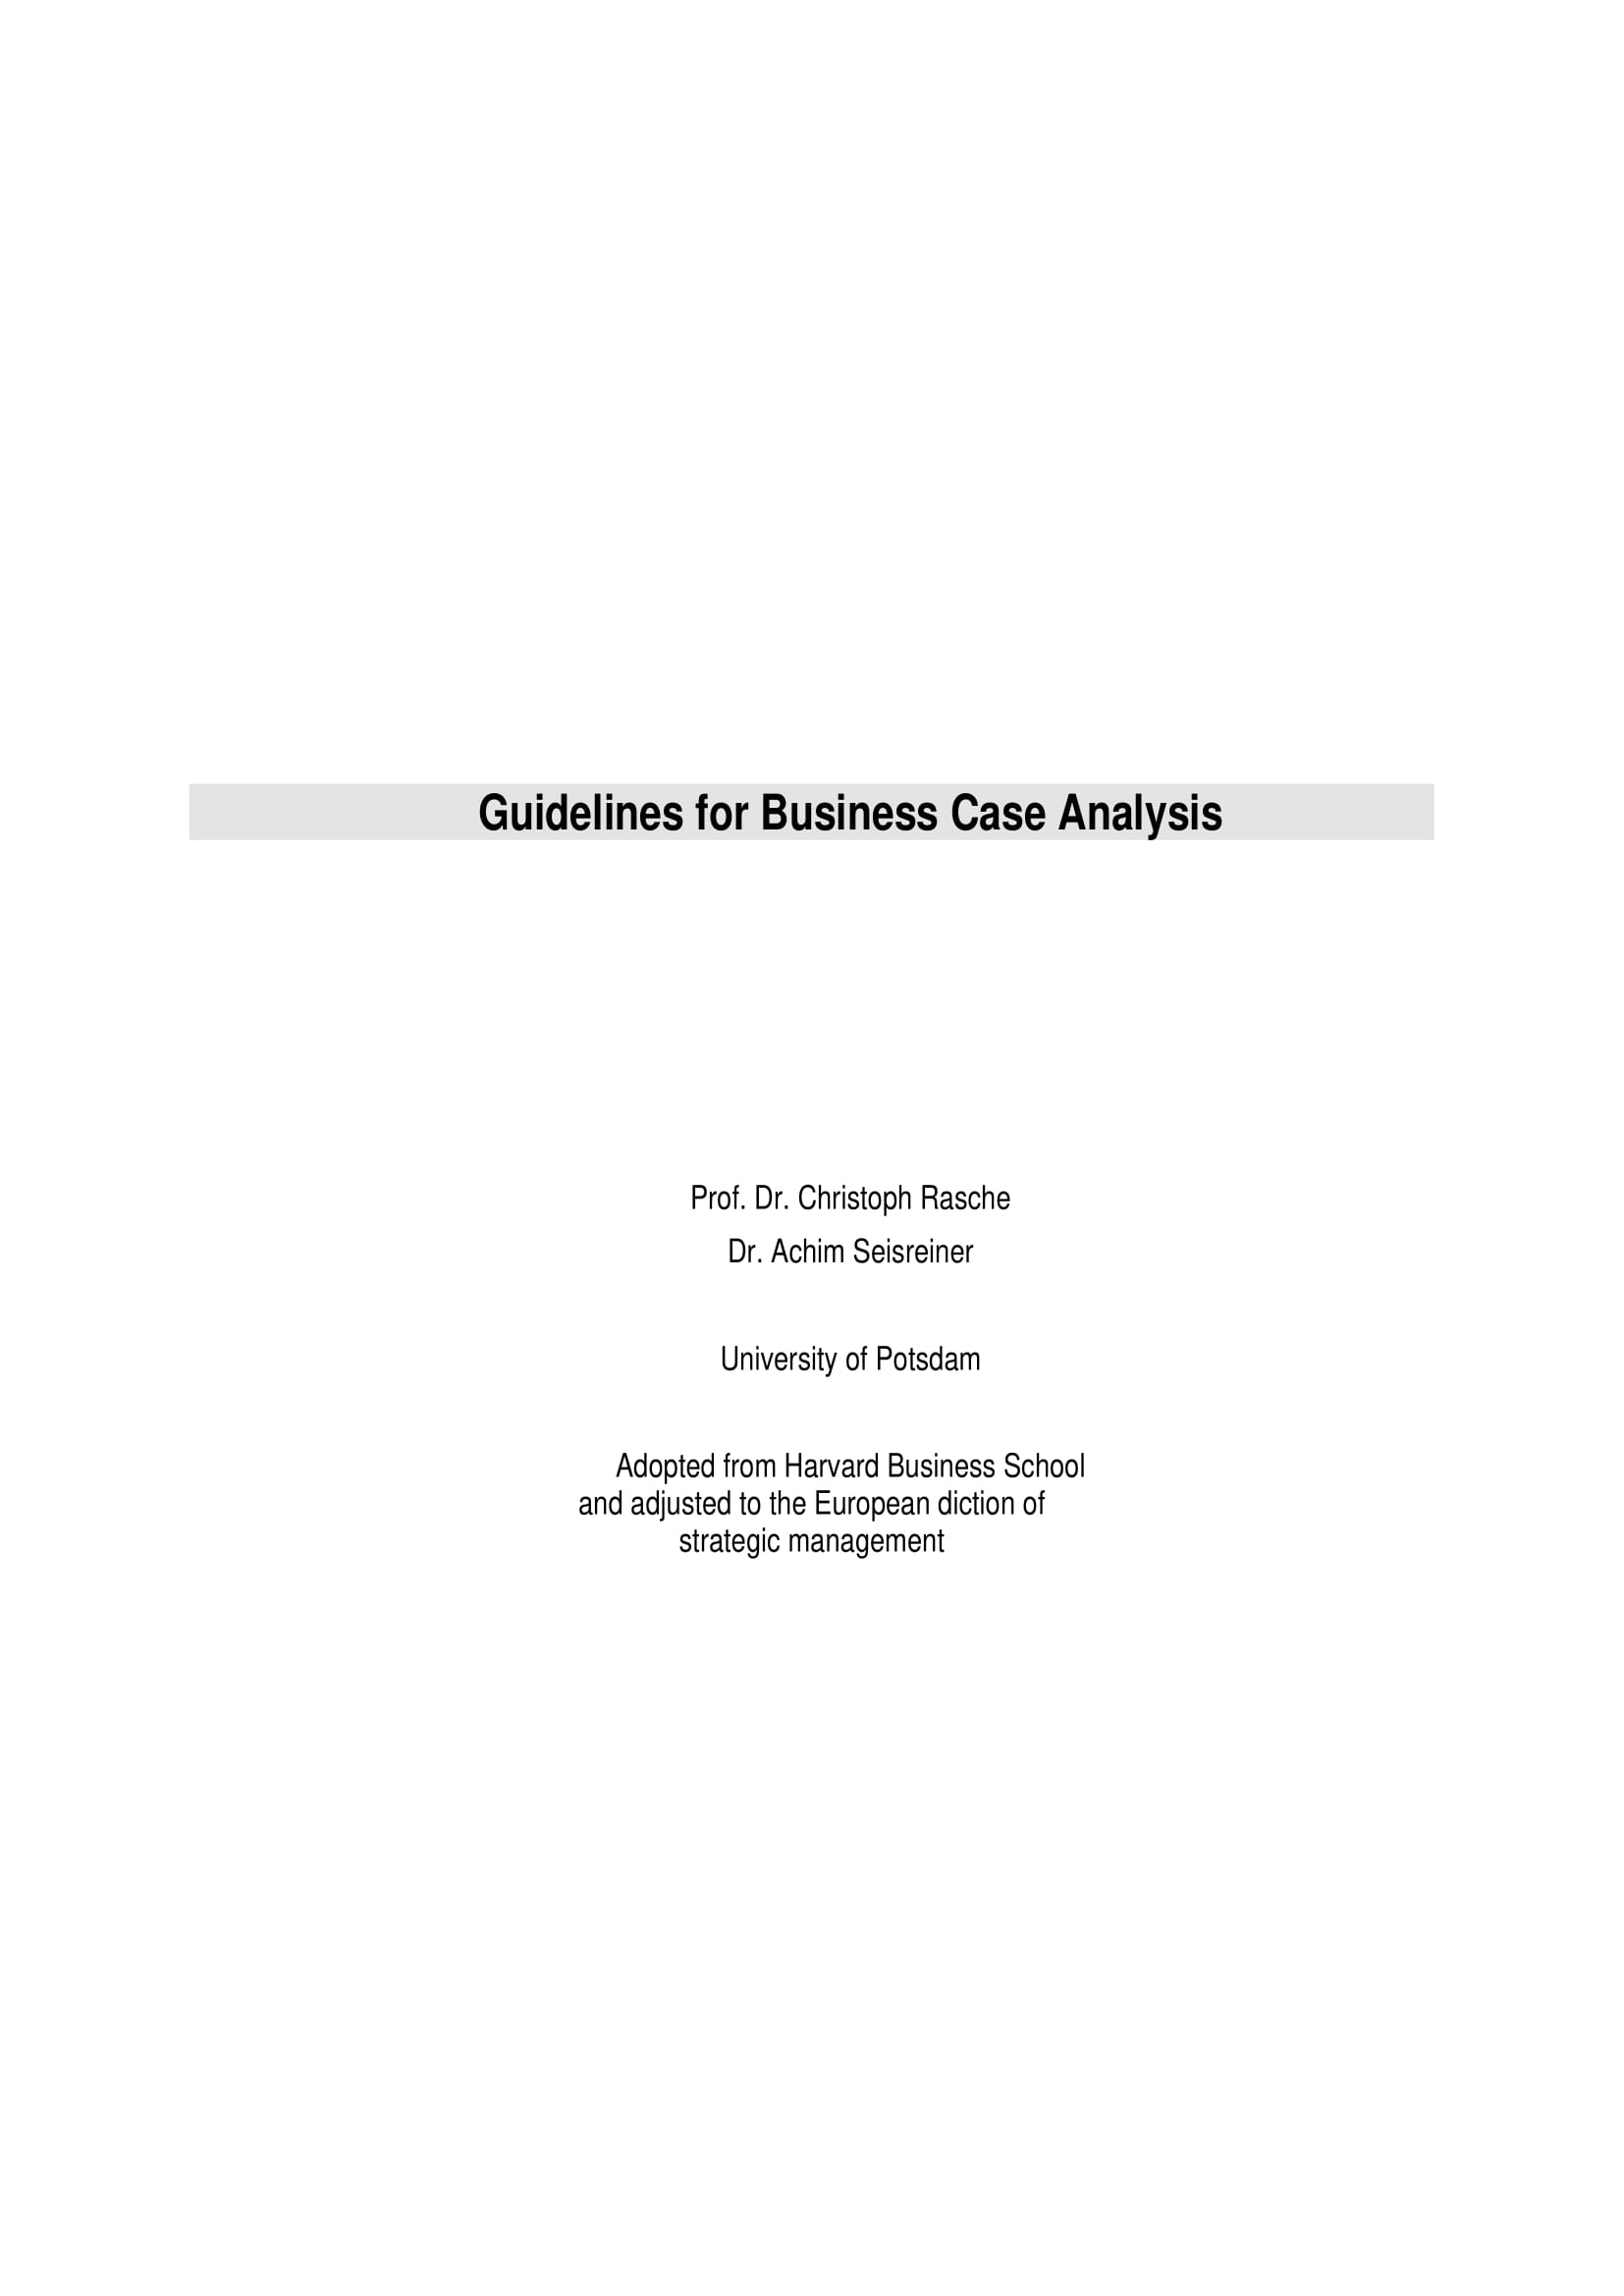 business case analysis guidelines example 01